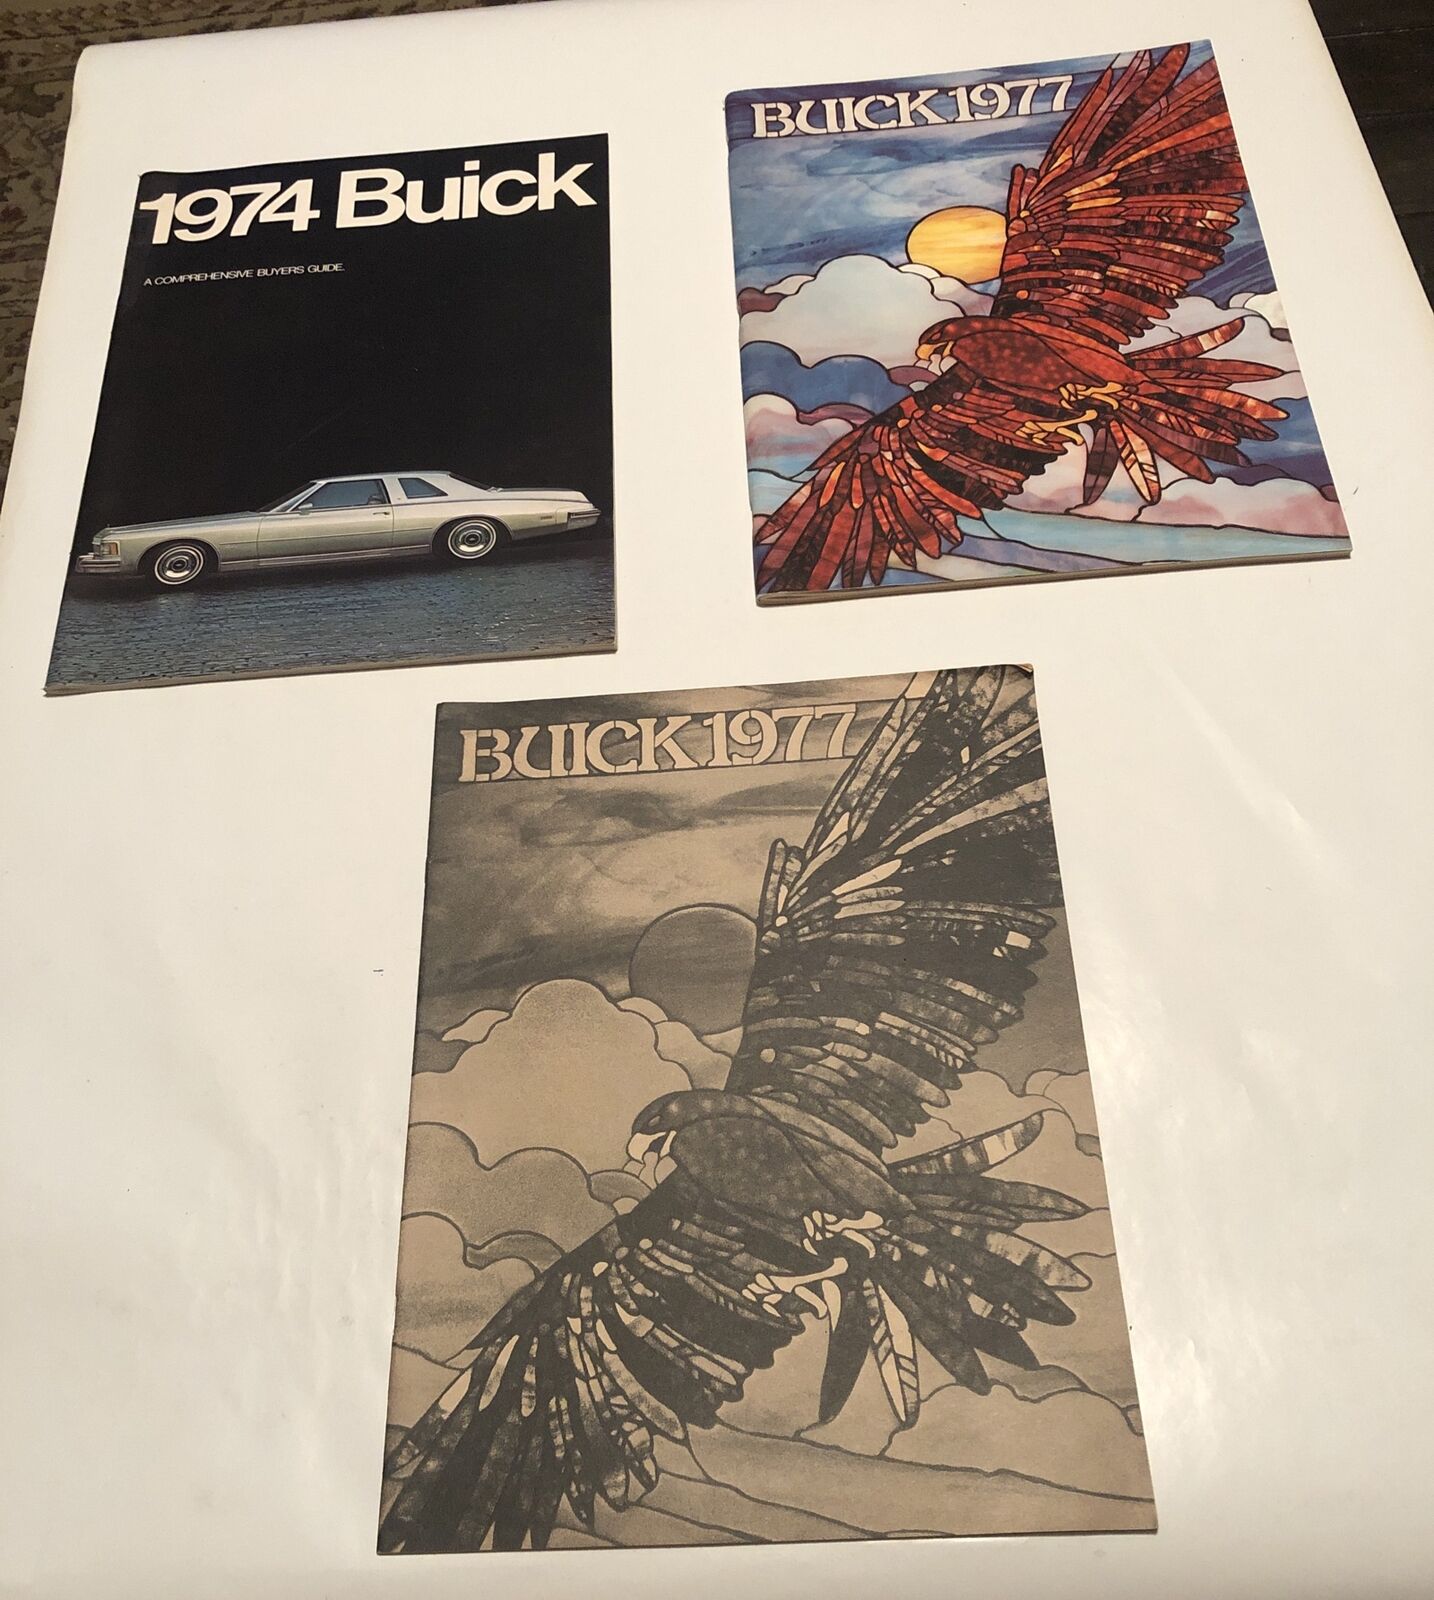 Vintage Buick 1974 And 1977 Car 🚘 Dealer Sales Brochures In Great Condition